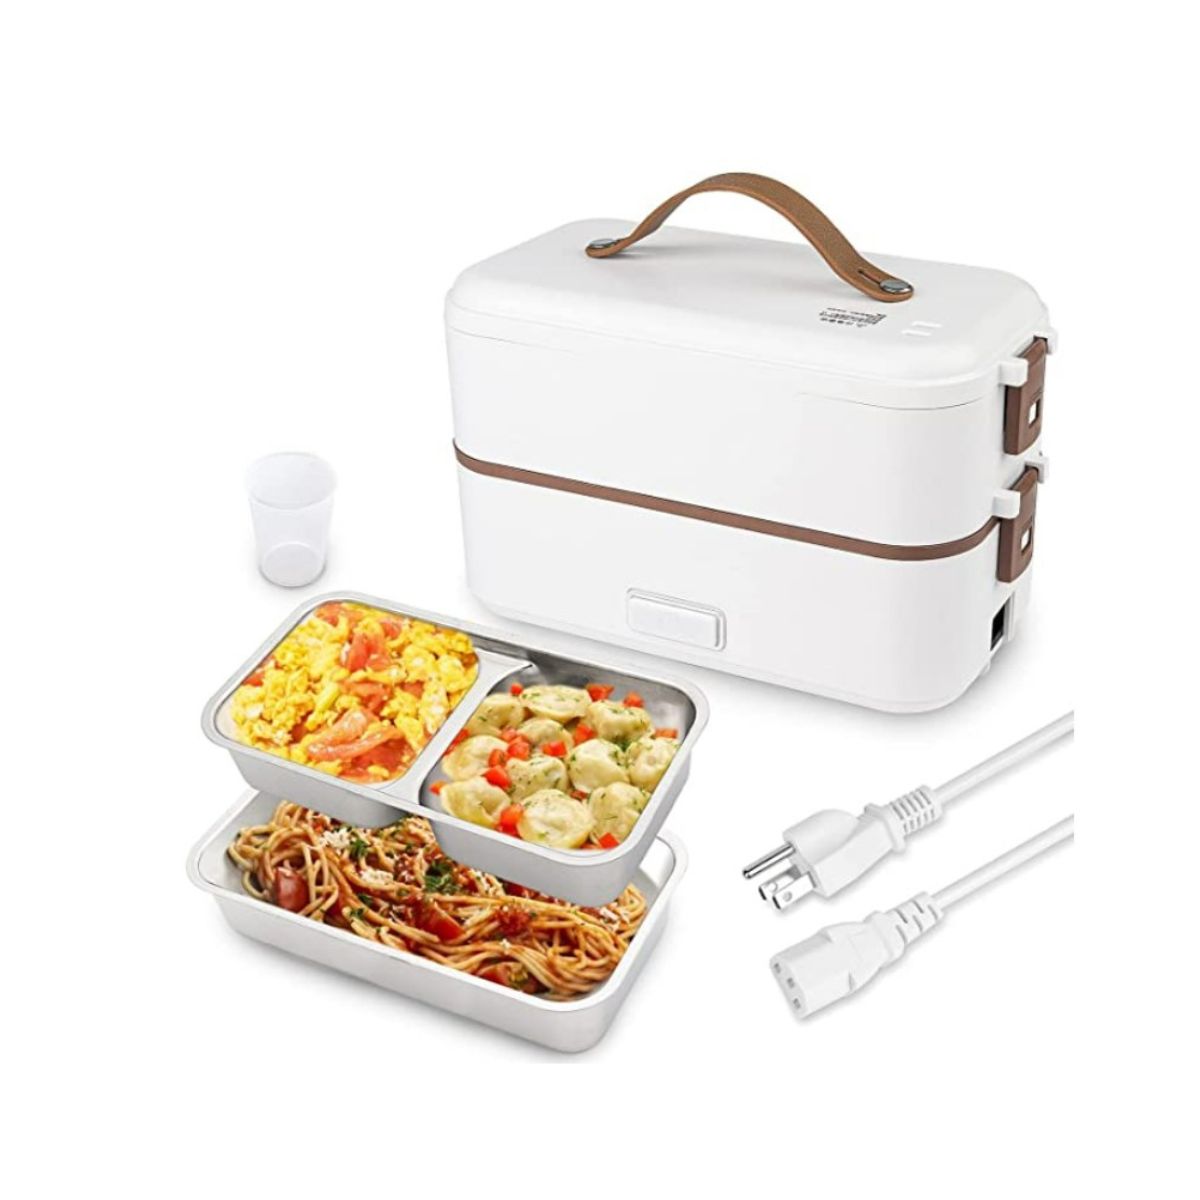 Double decker electric lunch box with stainless steel food trays.